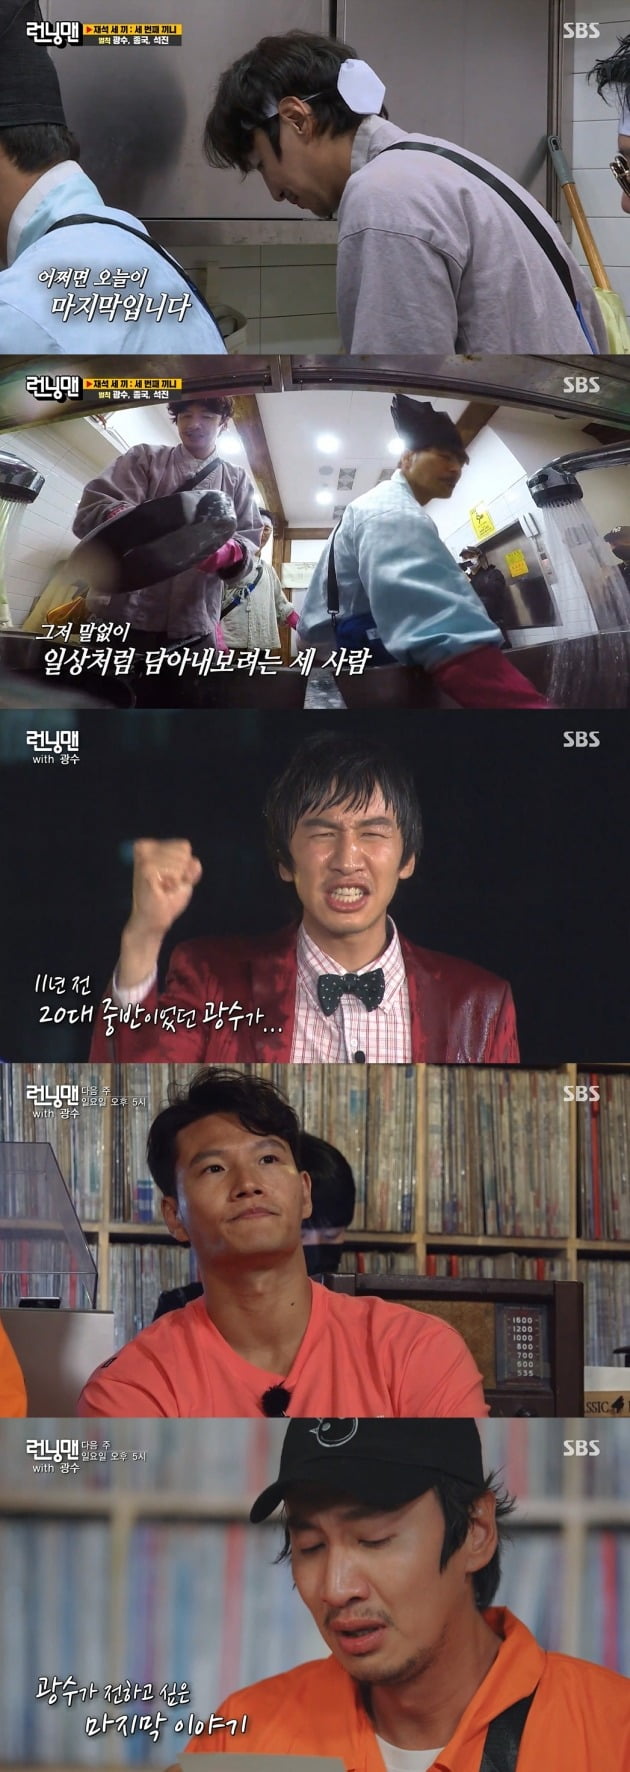 Lee Kwang-soo has been ahead of a tear break with Running Man members.SBS Running Man, which was broadcast on the last 6 days, was decorated with three pieces of stone race, which is prepared for three meals for Yoo Jae-Suk.The recording was made after the members got off Lee Kwang-soos article. As soon as the filming began, the members told Lee Kwang-soo, I get off., starting the Lee Kwang-soo teasing: as soon as Yoo Jae-Suk entered, he deliberately made fun of it as going out and being a mess.The mission is in full swing, and Yoo Jae-Suk has turned into a vice president and the members have turned into a head.Lee Kwang-soo was caught in embezzlement by Yoo Jae-Suk, and the members turned on Juri of Lee Kwang-soo, saying, Would you like to play Juri?Lee Kwang-soo laughed, saying, What if I really do it? It hurts.While the dish was being prepared, Yoo Jae-Suk played on Lee Kwang-soos back.Haha said, Who is our boss now? And Yoo Jae-Suk said, I am like this on this guys back.Kim Jong-kook took the concept as a chunno-man, volunteering to play the right-hand man role of Yoo Jae-Suk; Kim Jong-kook bought the members the originality of political thug.In the second Mission Galbijjim game, members rebelled, and Yoo Jae-Suk fell to the head; Lee Kwang-soo was selected as the new vice president.The members then rebelled again for the cost of purchasing Hodok ingredients, which resulted in Yoo Jae-Suk becoming a big deal again.Kim Jong-kook quickly changed his posture according to who he was and laughed.But the last person to be a big deal was Kim Jong-kook.Kim Jong-kook received a Hanwoo set as a gift, and Kim Jong-kooks chosen hairy Lee Kwang-soo also received a Hanwoo set.However, Lee Kwang-soo won the penalty and was washed with the last penalty.Lee Kwang-soo was given a dishwashing penalty with Ji Suk-jin and Kim Jong-kook.Ji Suk-jin said: It could be Lee Kwang-soos last penalty; the last episode is likely to have no penalty.Todays penalty is good for some reason, said Lee Kwang-soo, who expressed regret at getting off. Kim Jong-kook said, Do not say that.I was awkward, he said, trying to concentrate more on washing dishes.Lee Kwang-soo, who has been with Running Man for 11 years, will get off the air next week.The trailer featured Lee Kwang-soo and the members of the tear-breaking breakup, who also wobbled and said sorry.a fairy tale that children and adults hear togetherstar behind photoℑat the same time as the latest issue